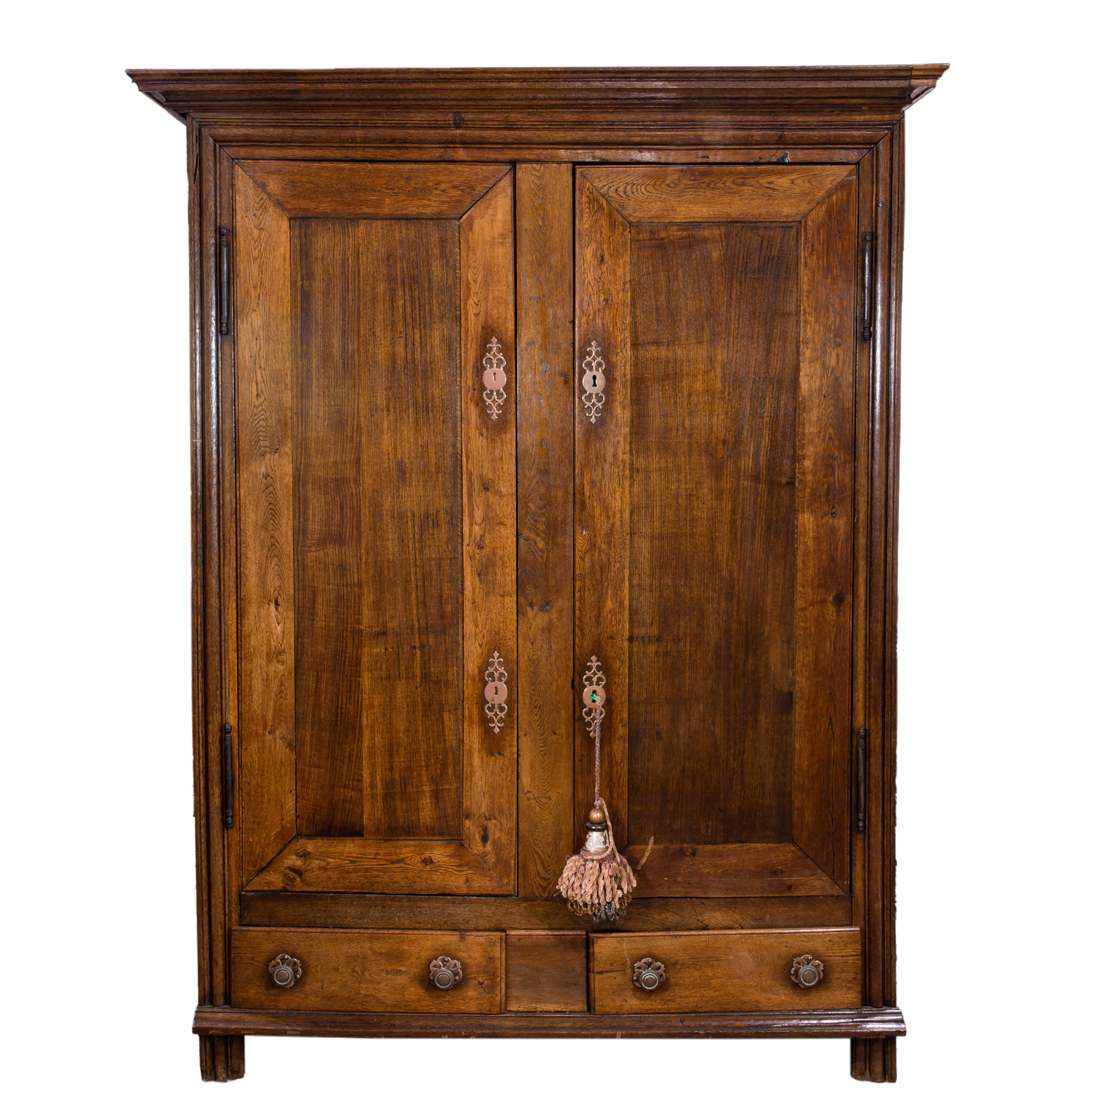 A LARGE FRENCH PROVINCIAL ARMOIRE